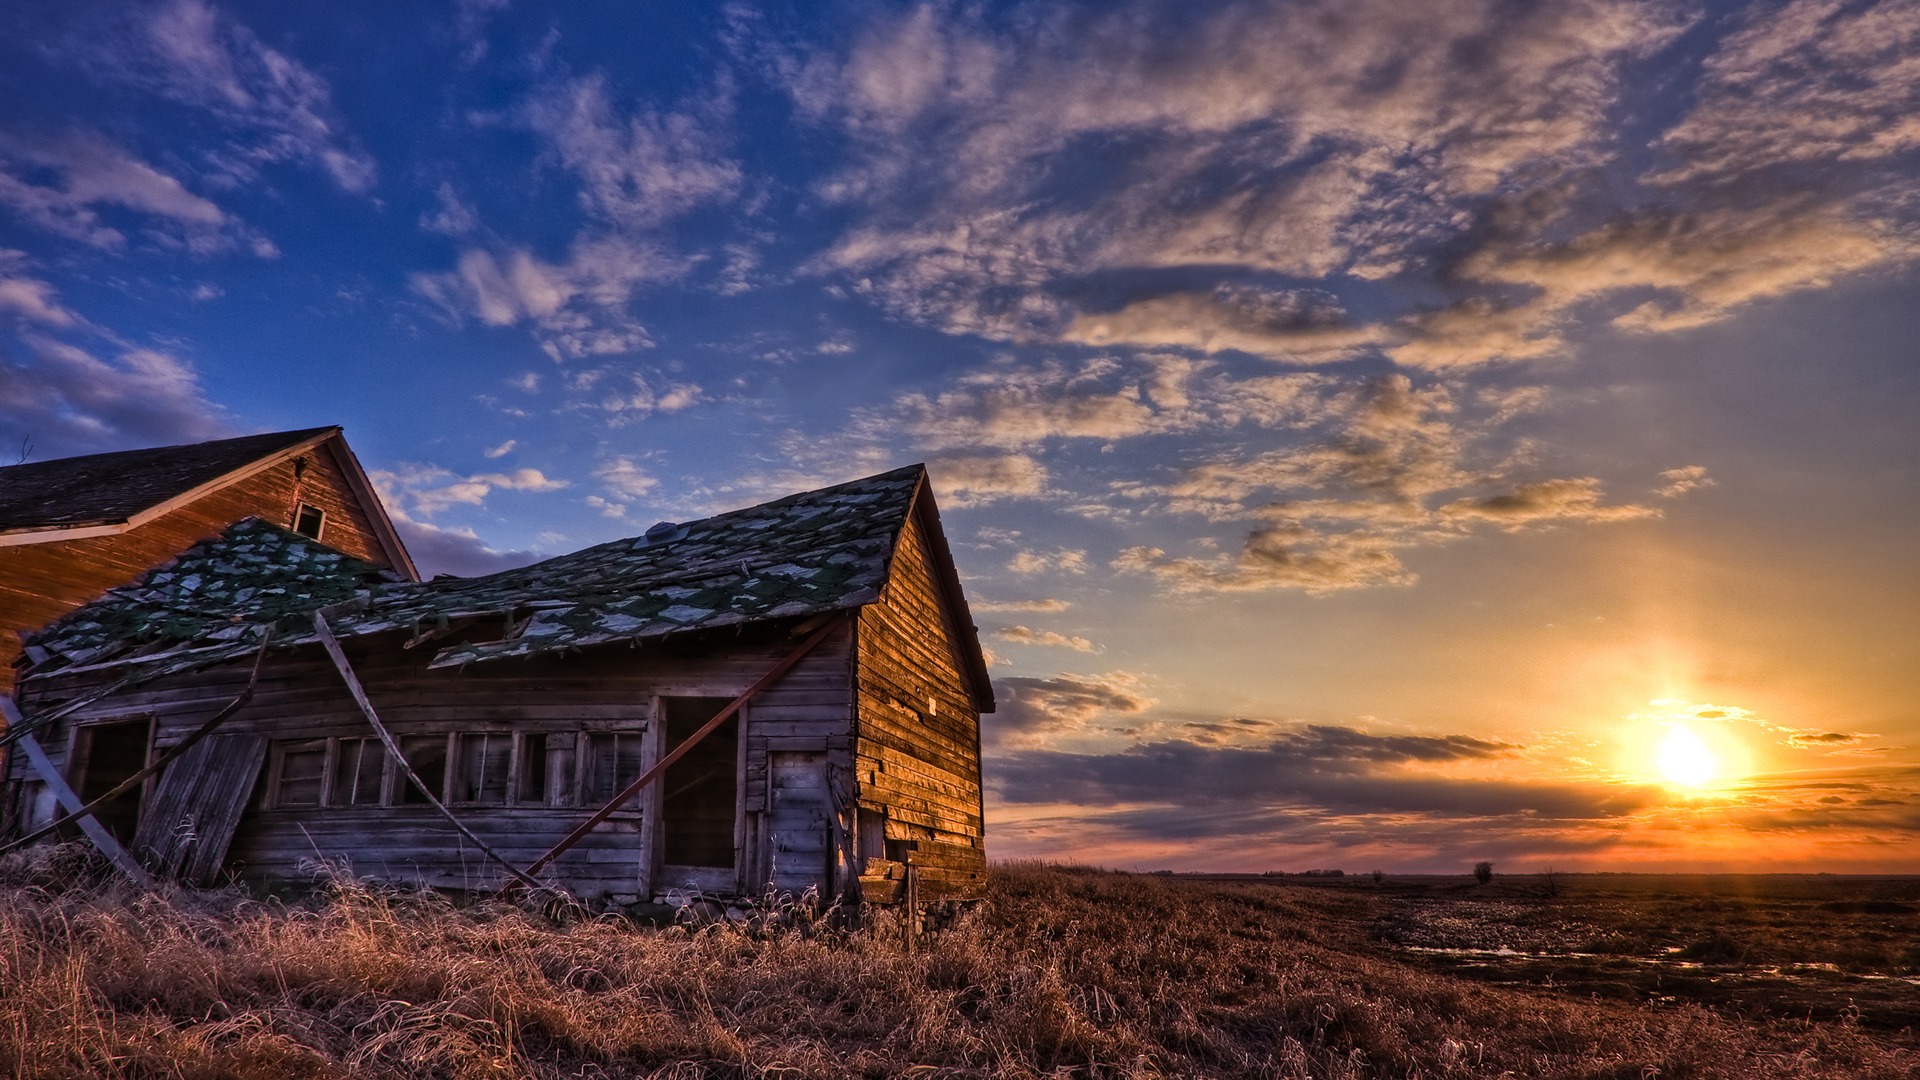 Old rusty farm house in sunset Full HD wallpaper Full HD Wallpapers